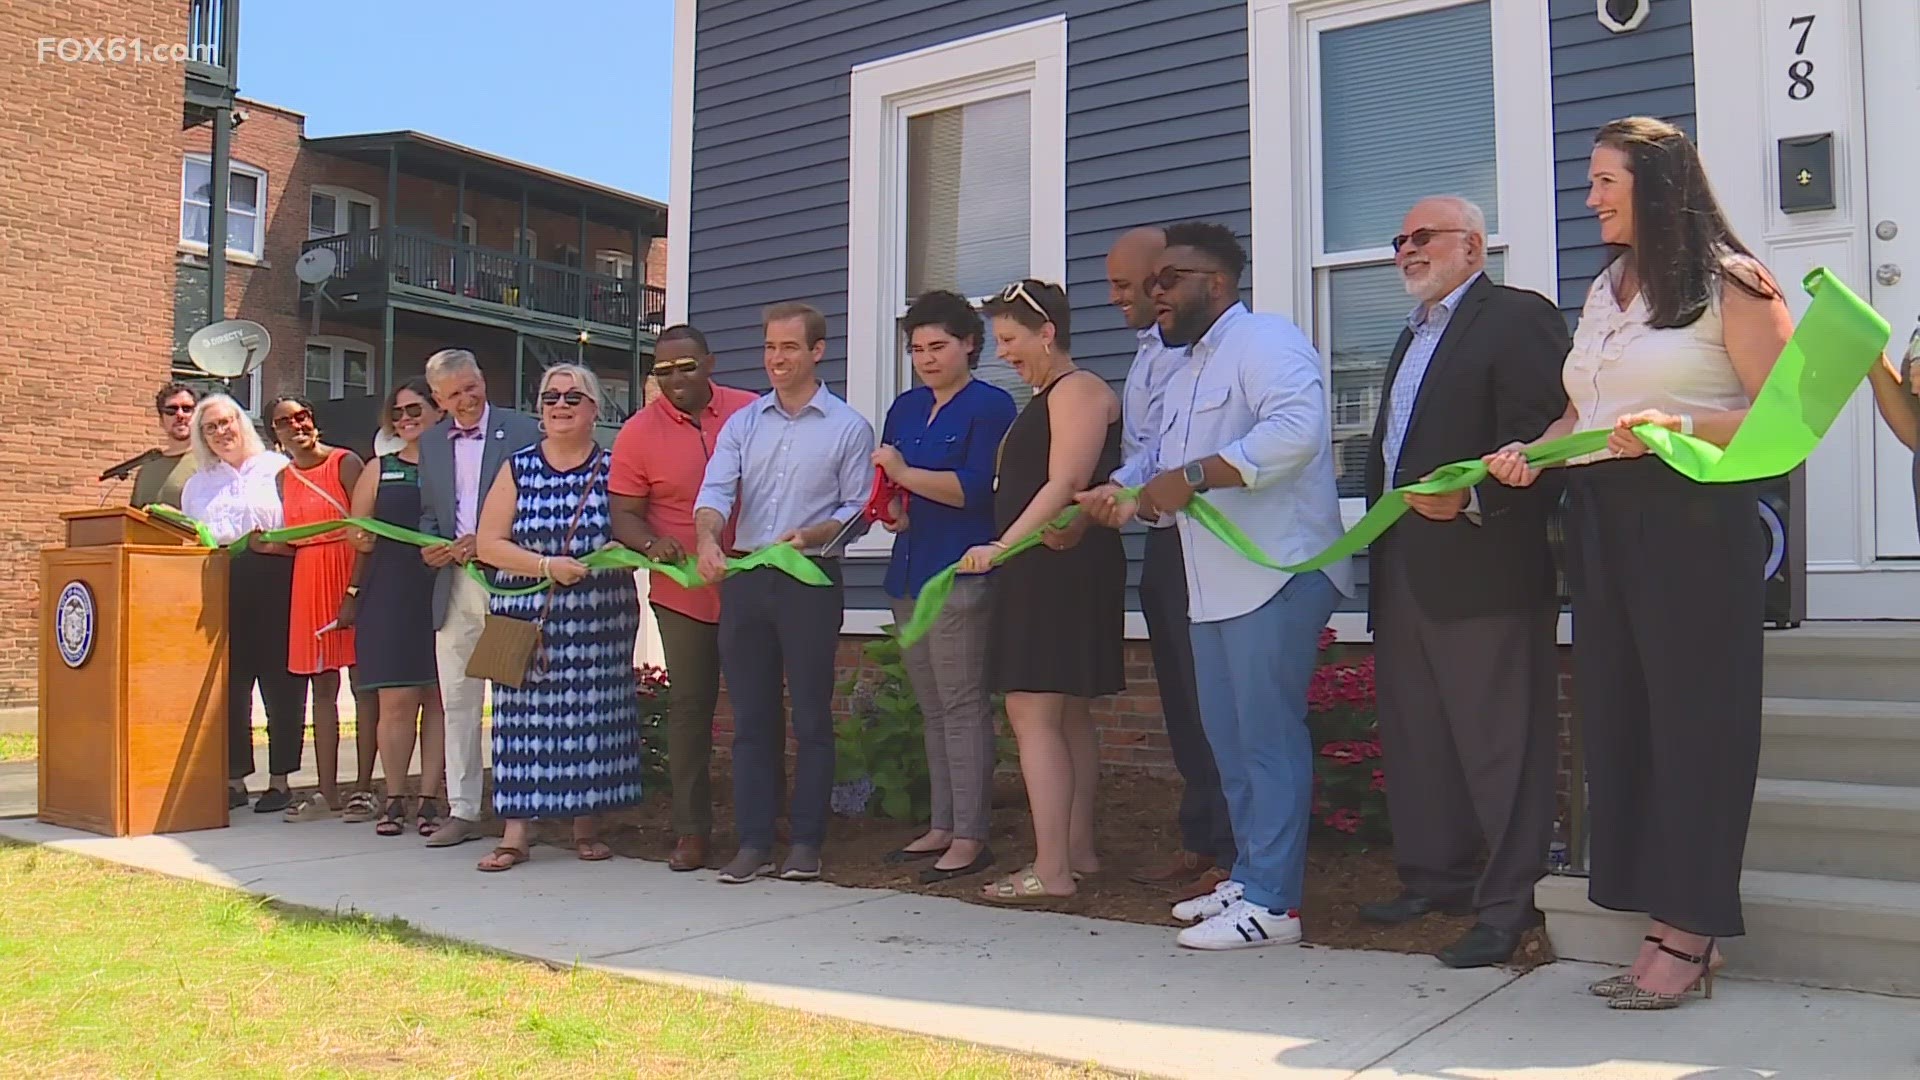 The house was re-done by the upstart non-profit called the Hartford Land Bank, a group that takes blighted properties and makes them over.